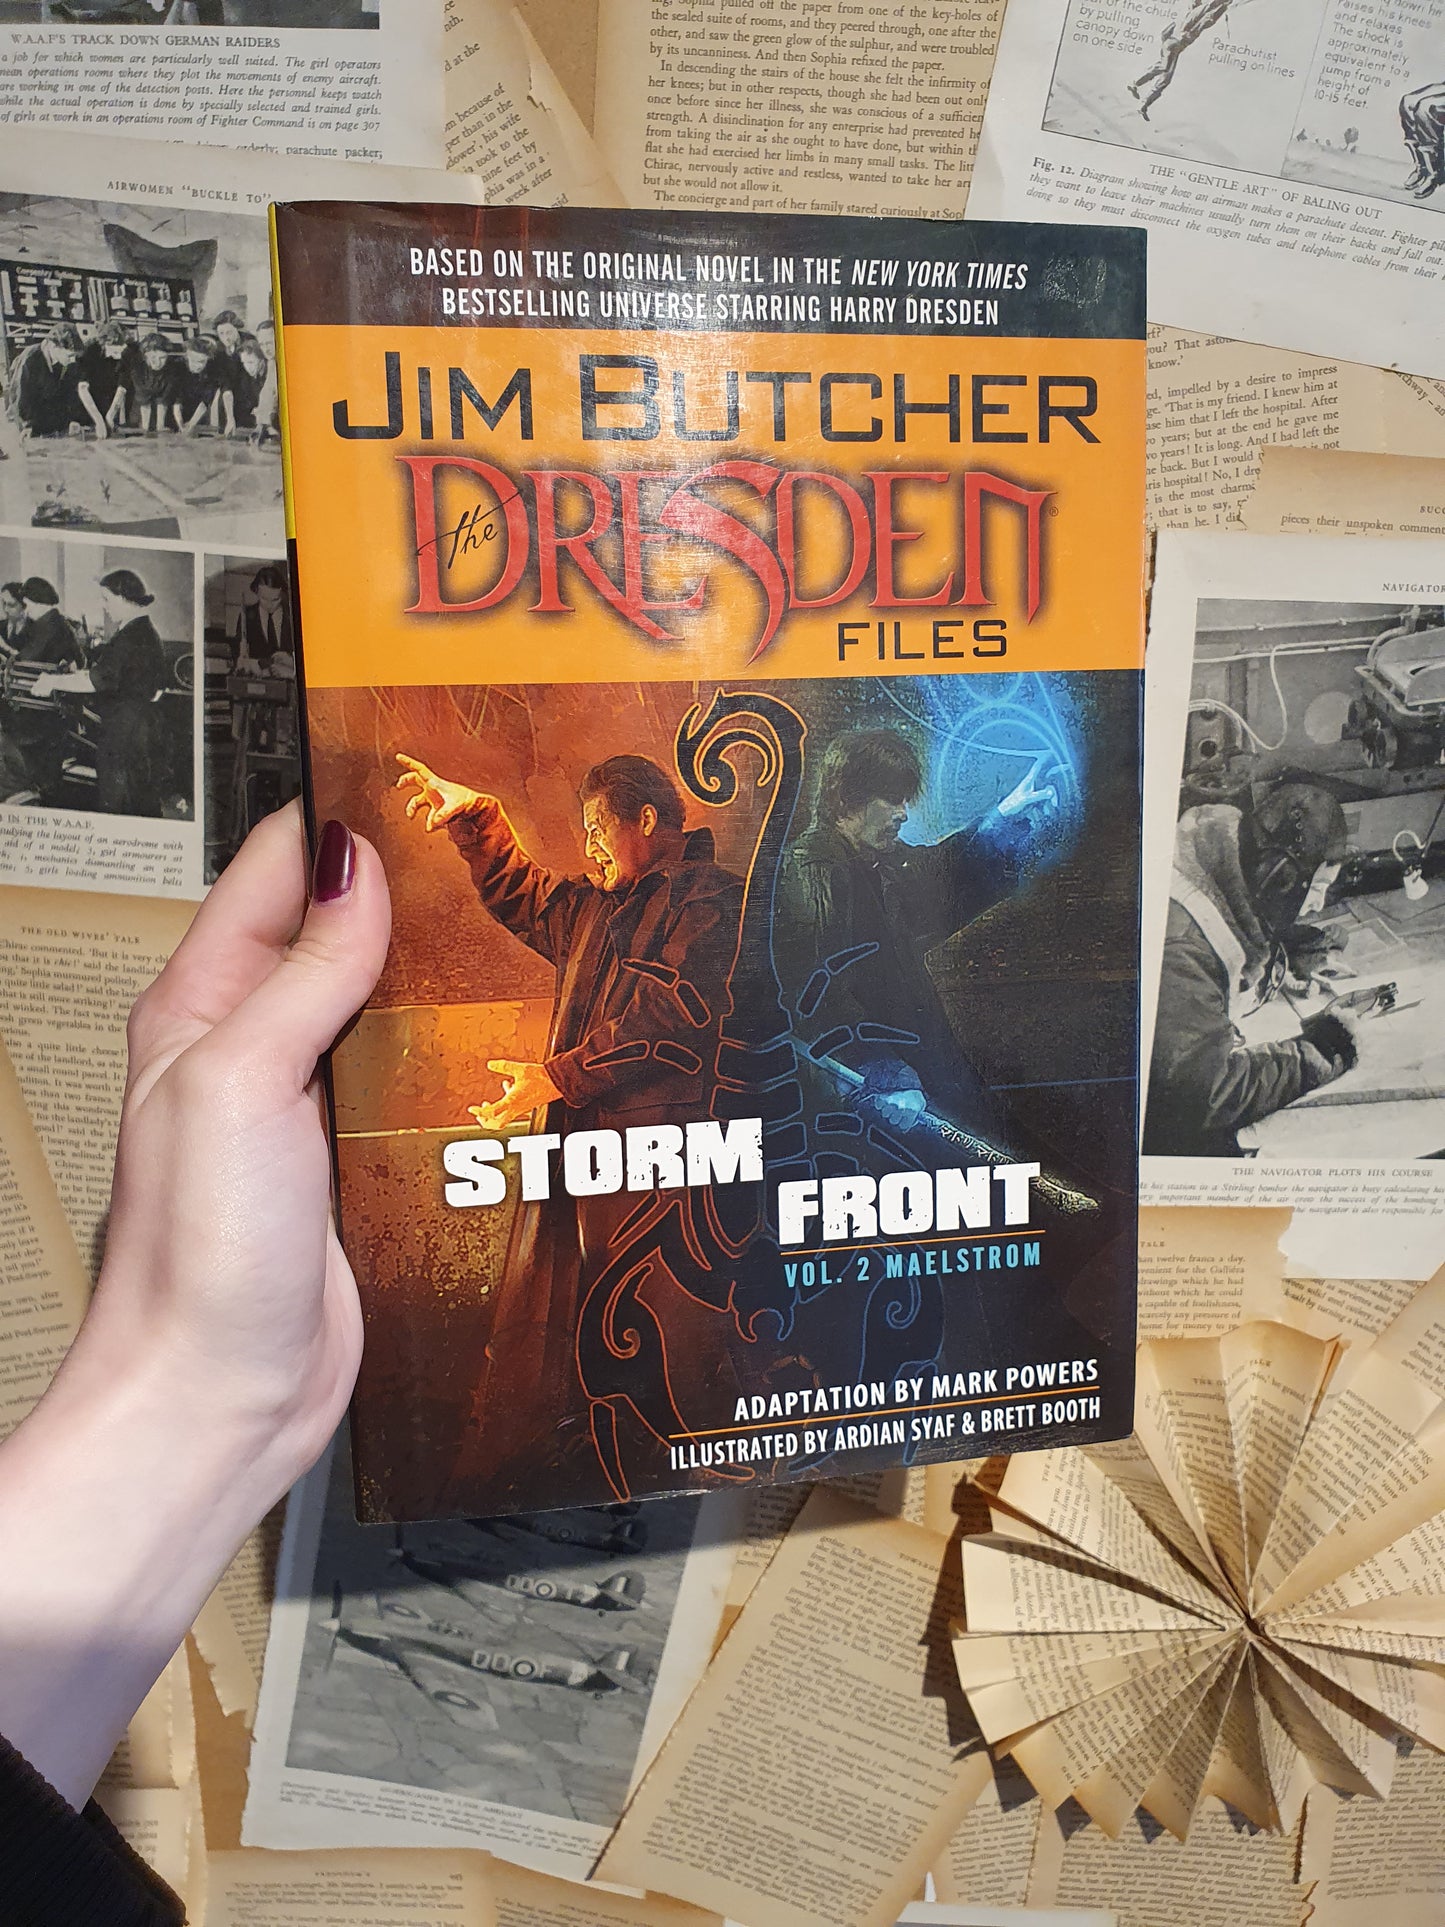 The Dresden Files Vol 2 Maelstrom by Jim Butcher (2011)